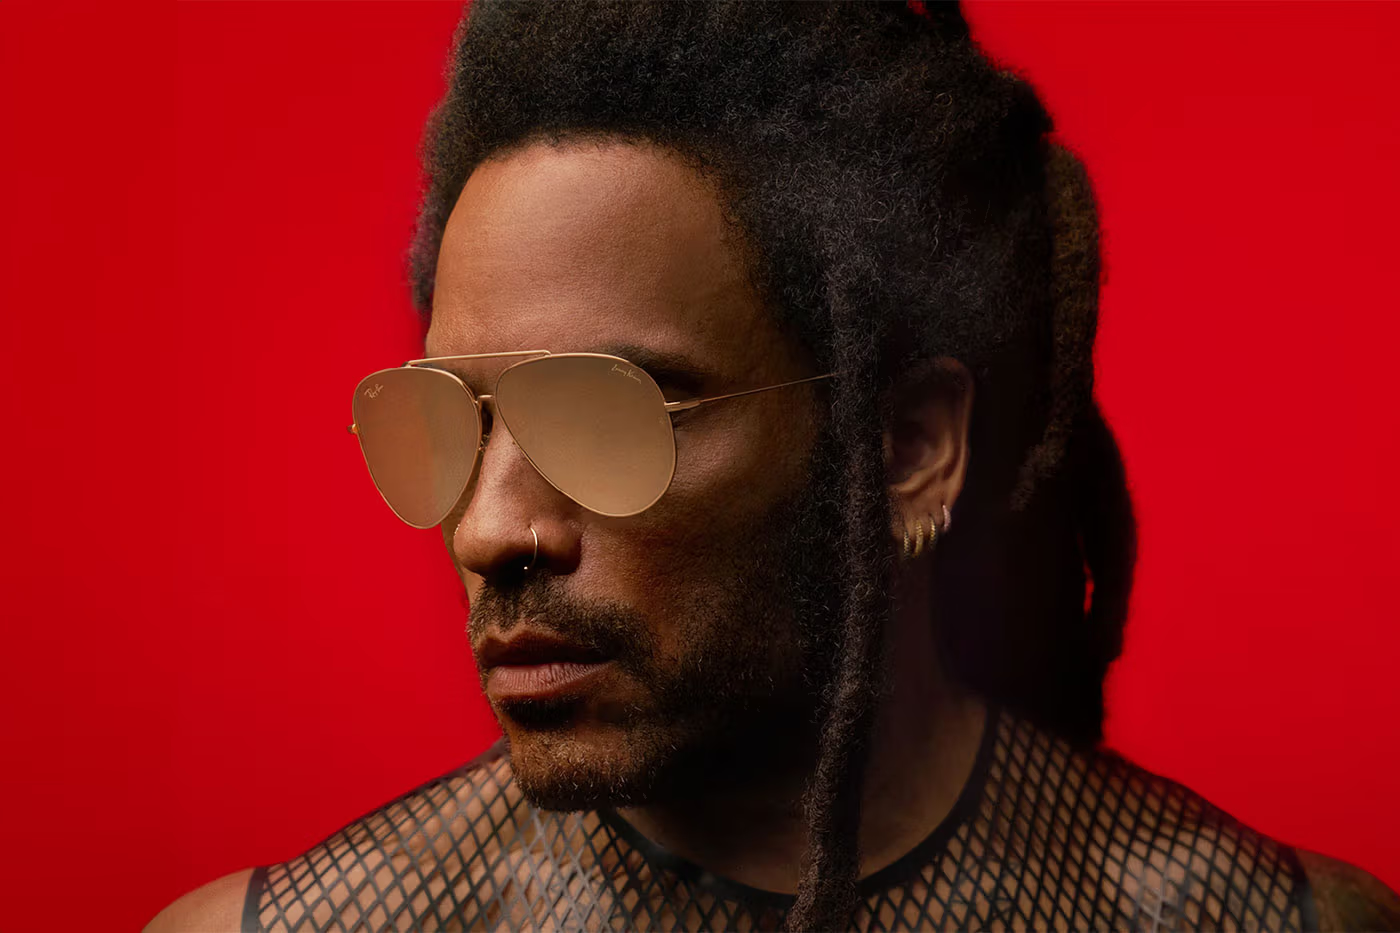 Lenny Kravitz in glasses from the Ray Ban